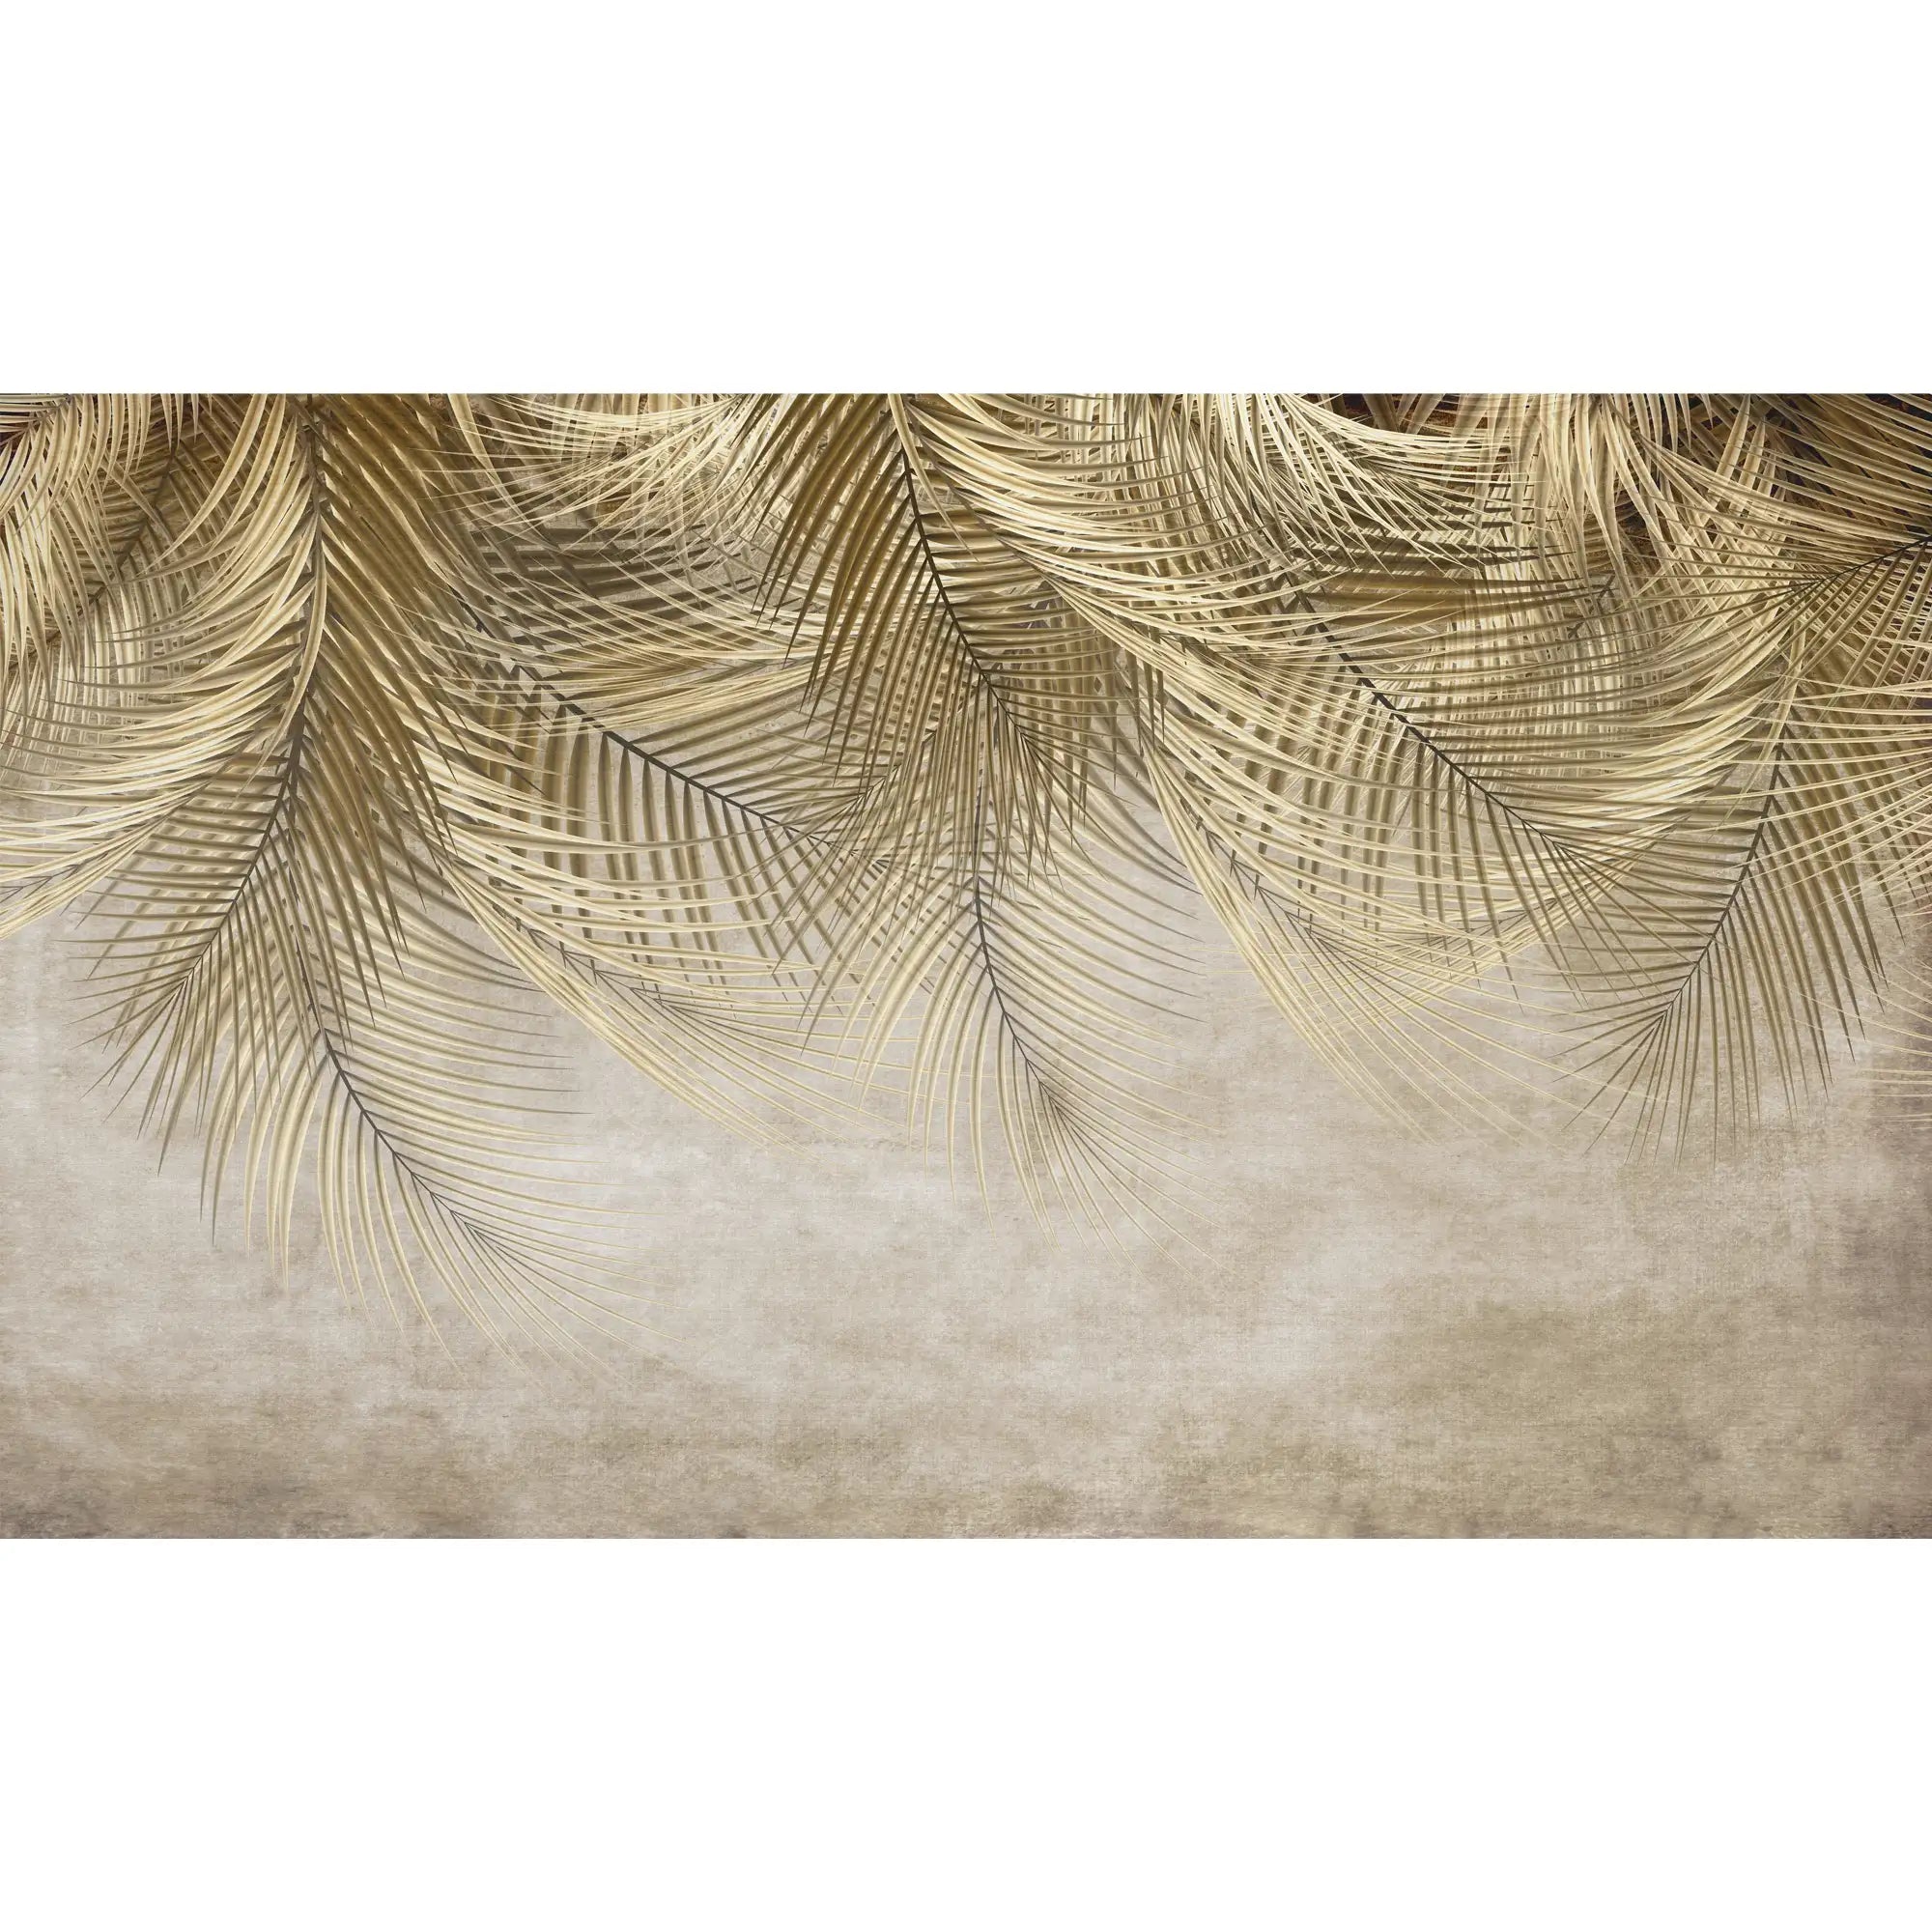 3175 / Golden Palm Leaf Wallpaper - Distressed Paper Style, Tropical Wall Decor, Peel and Stick Wallpaper for Boho Room - Artevella